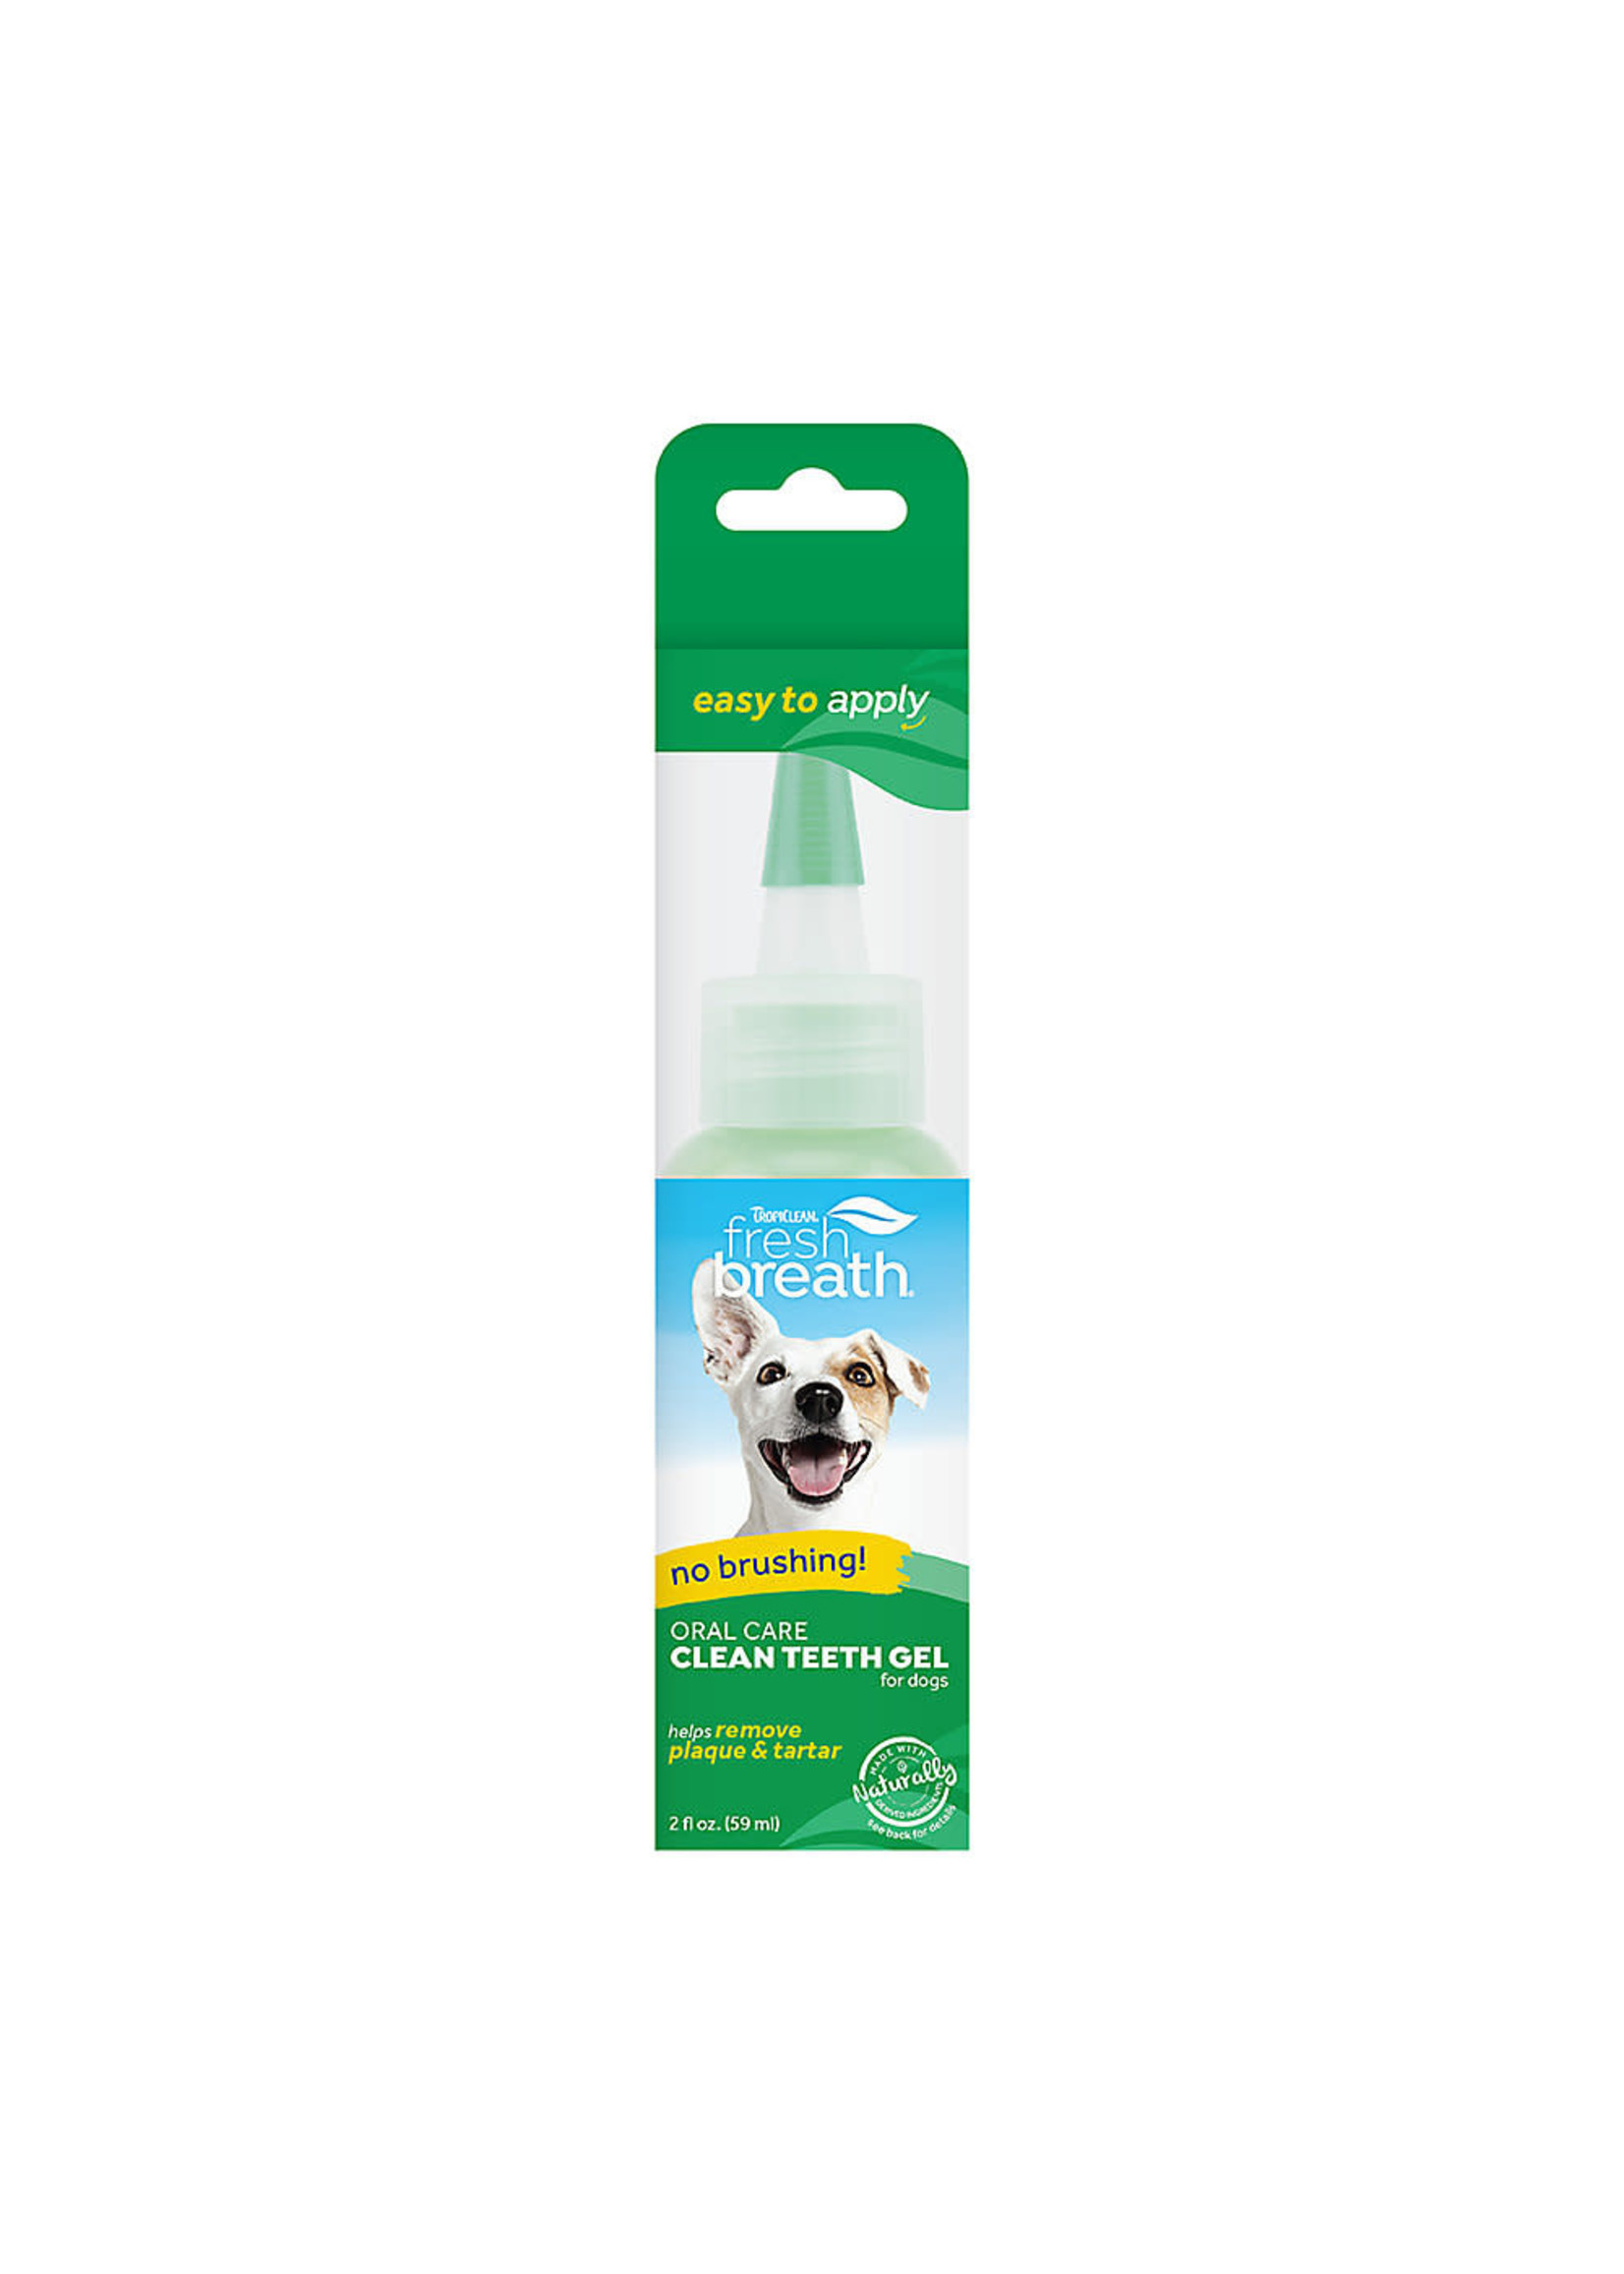 Tropiclean TropiClean Fresh Breath No Brushing Clean Teeth Dental & Oral Care Gel for Dogs, 2oz - Made in USA - Complete Dog Teeth Cleaning Solution - Helps Remove Plaque & Tartar